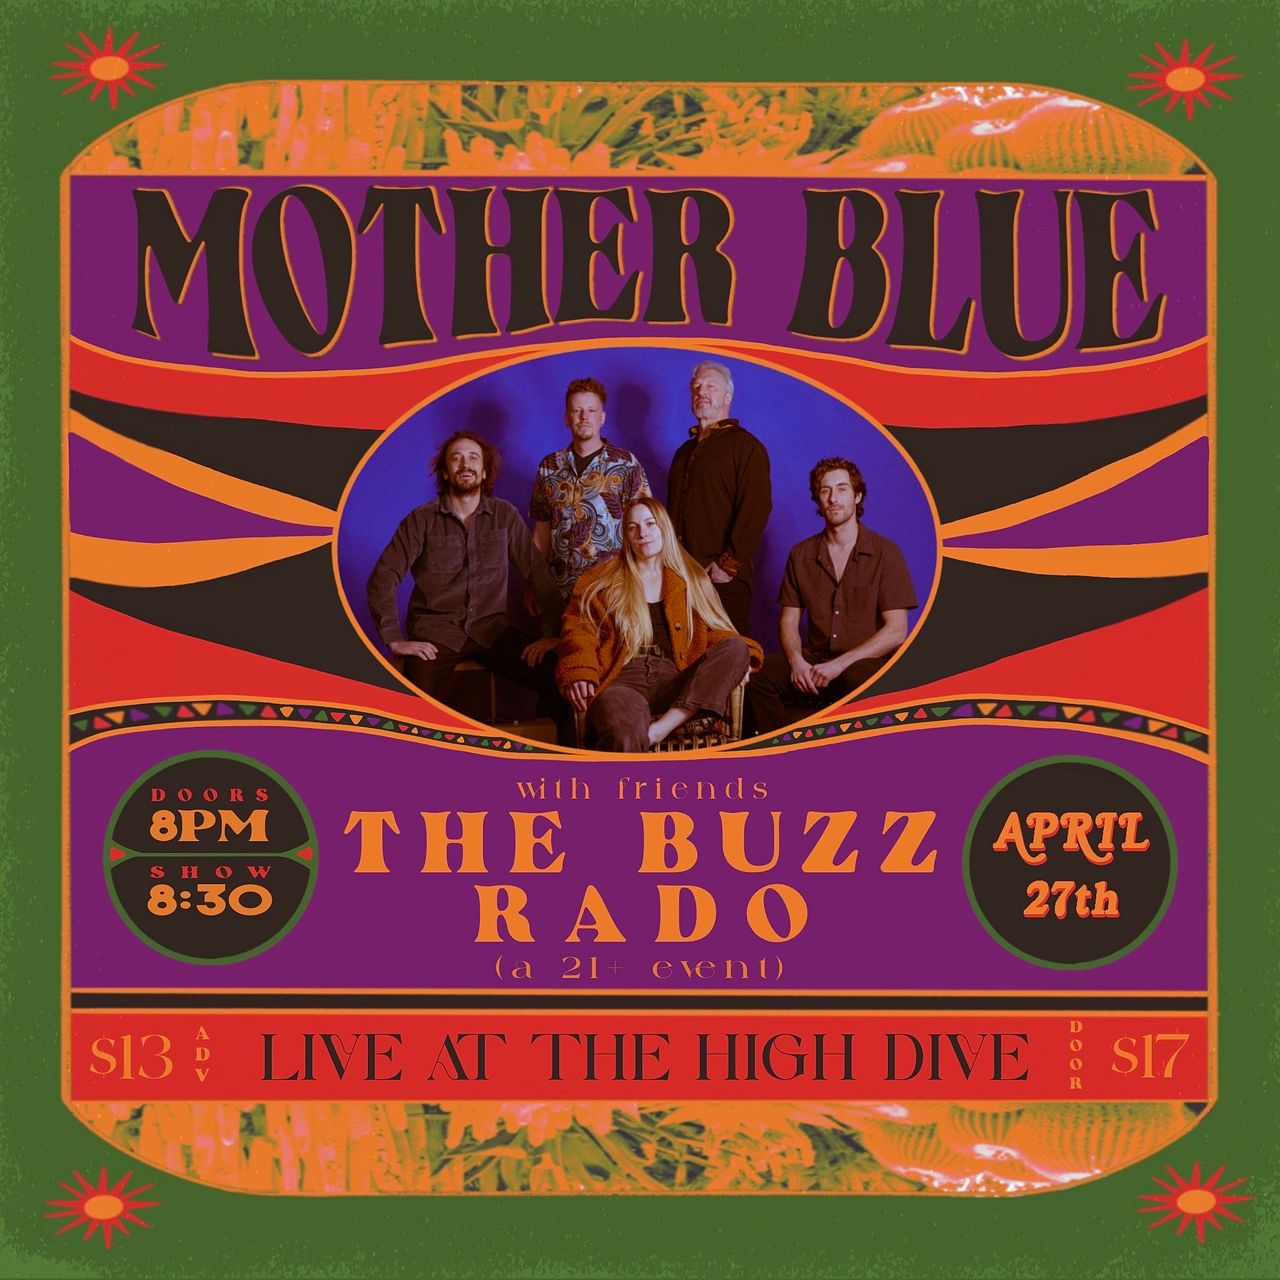 mother-blue-w-the-buzz-rado-tickets-at-high-dive-in-seattle-by-high